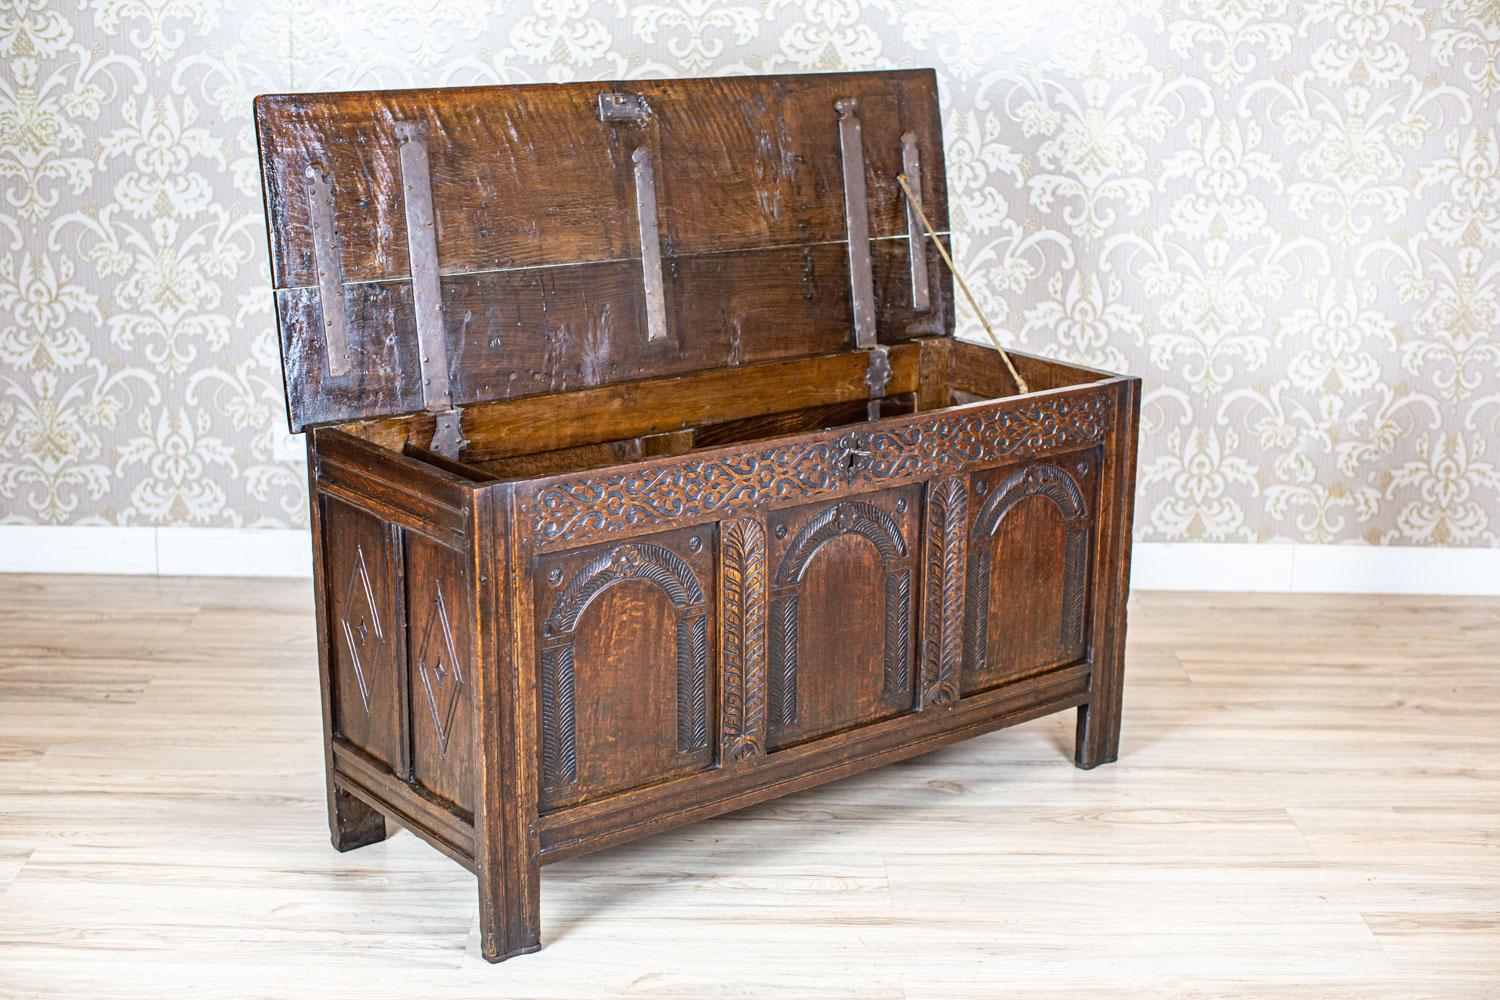 European 19th-Century Oak Cassone in Carved Floral Patterns For Sale